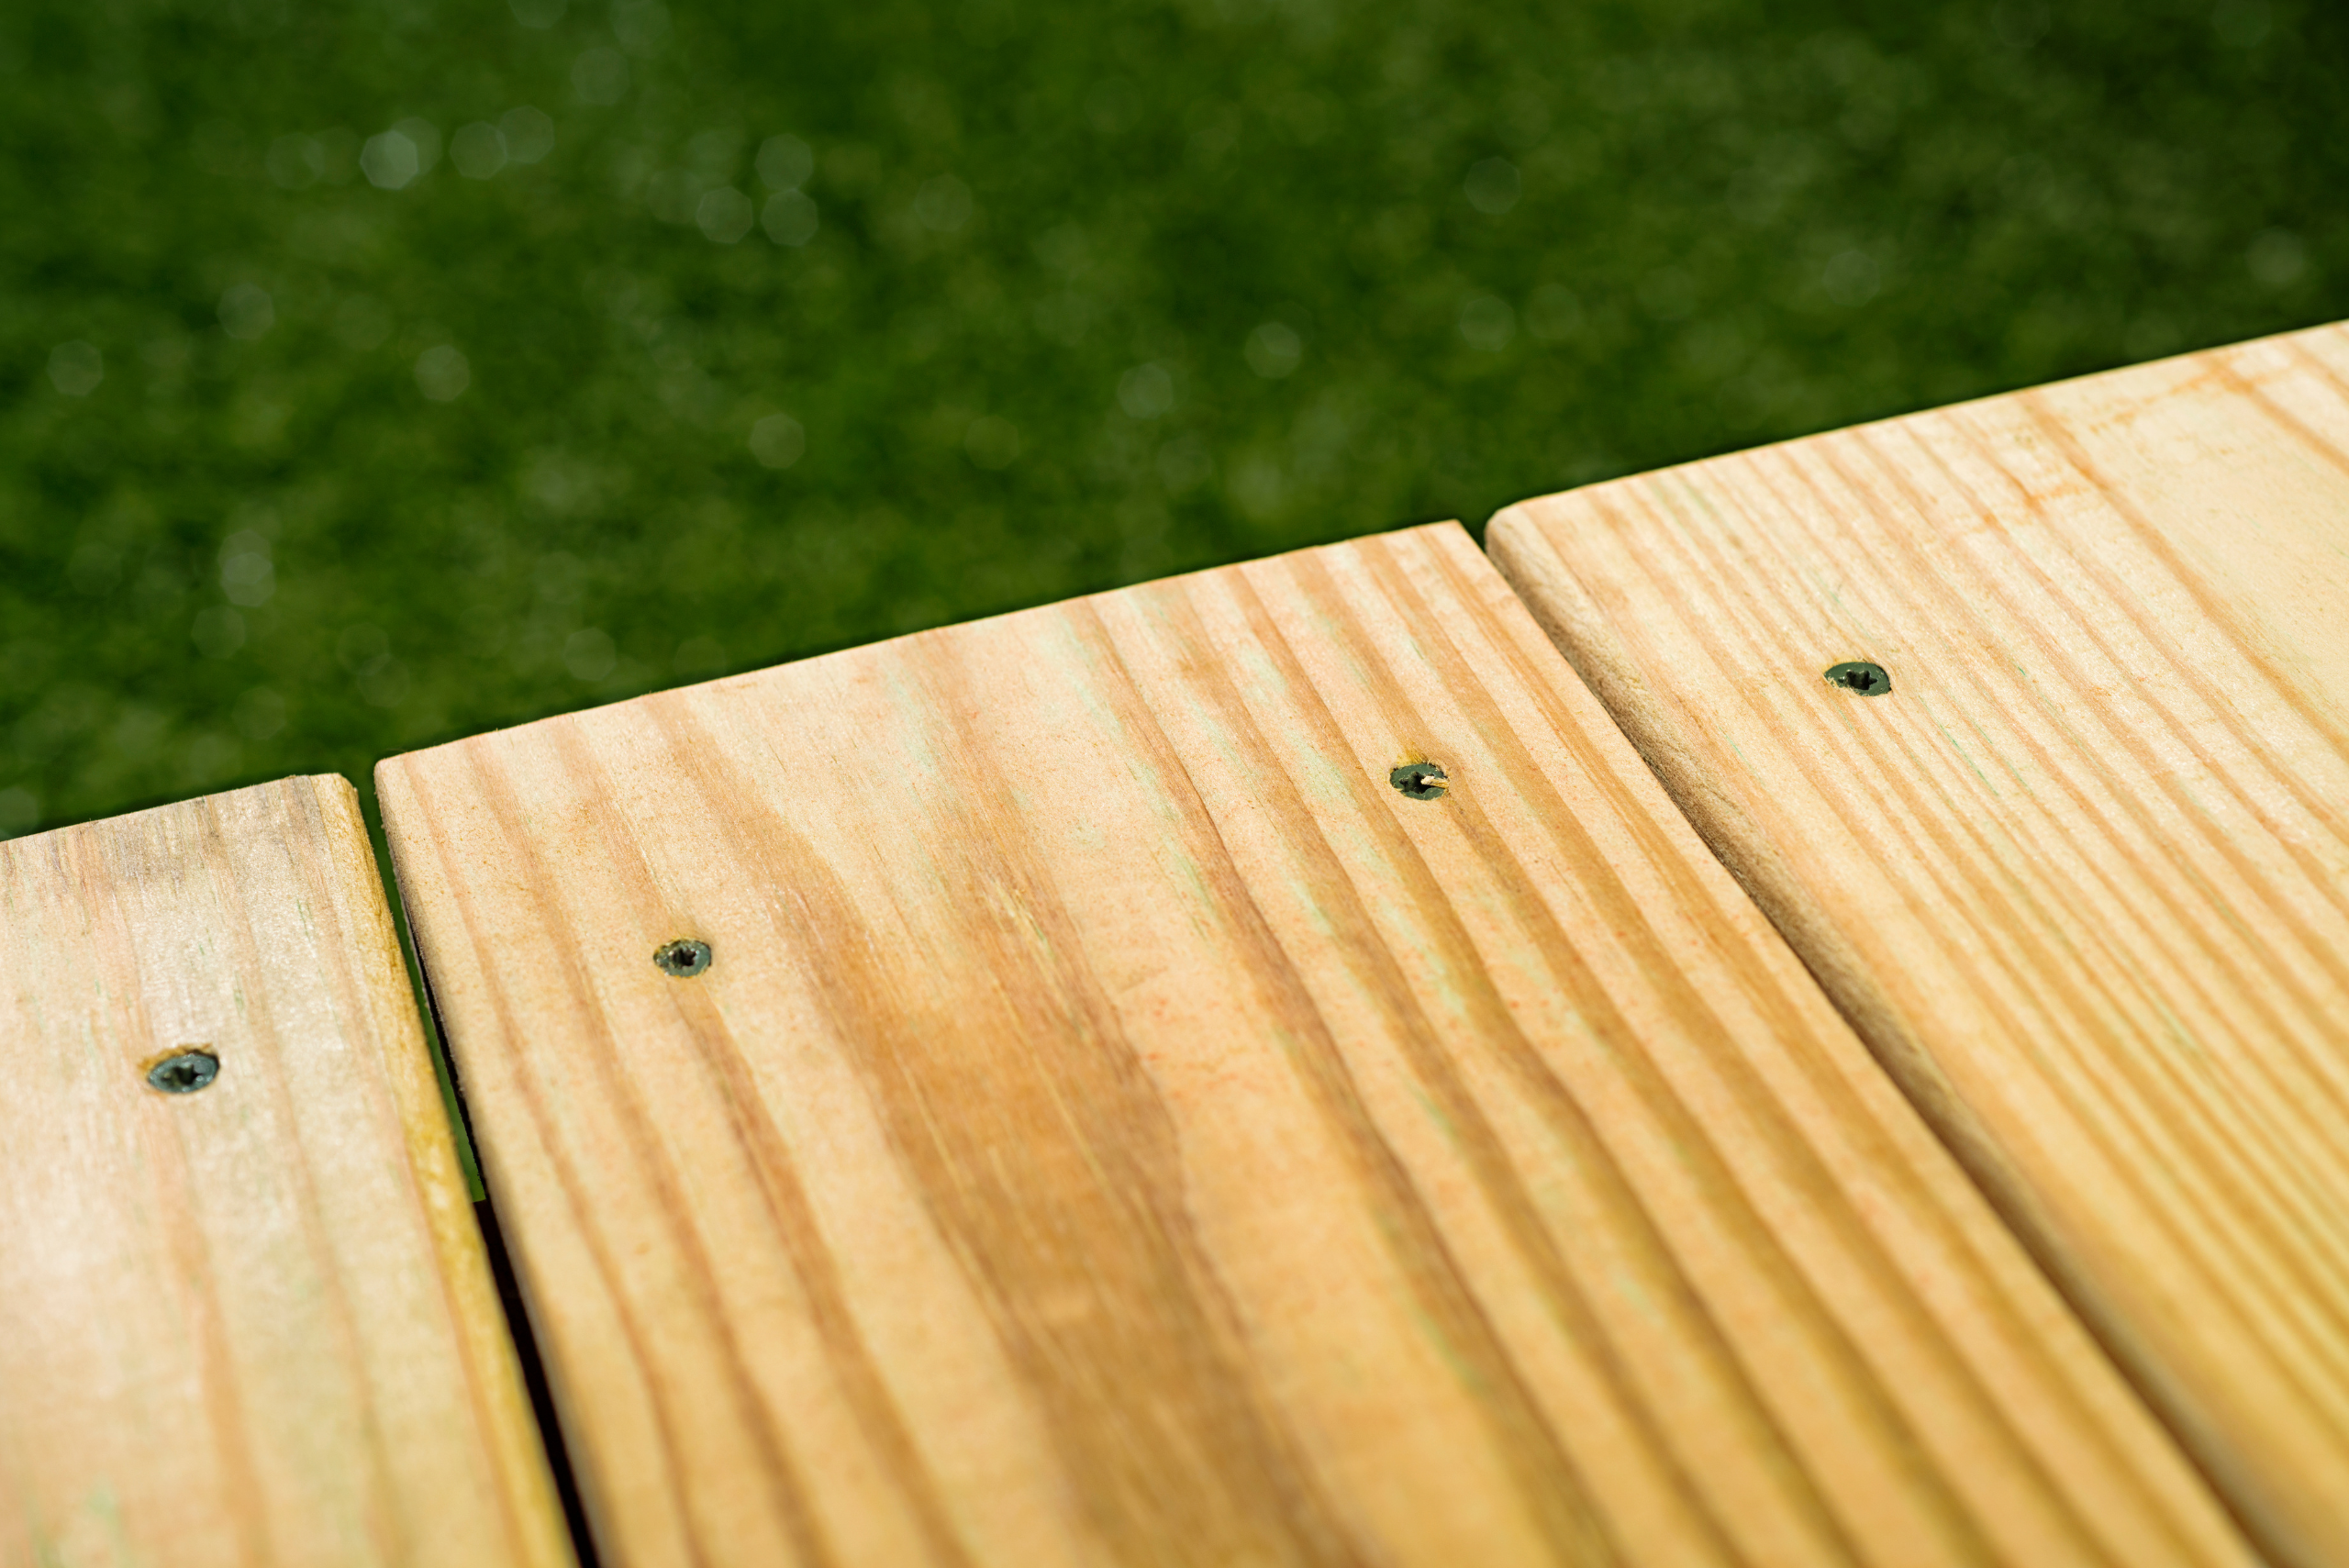 A deck made of pressure treated wood.